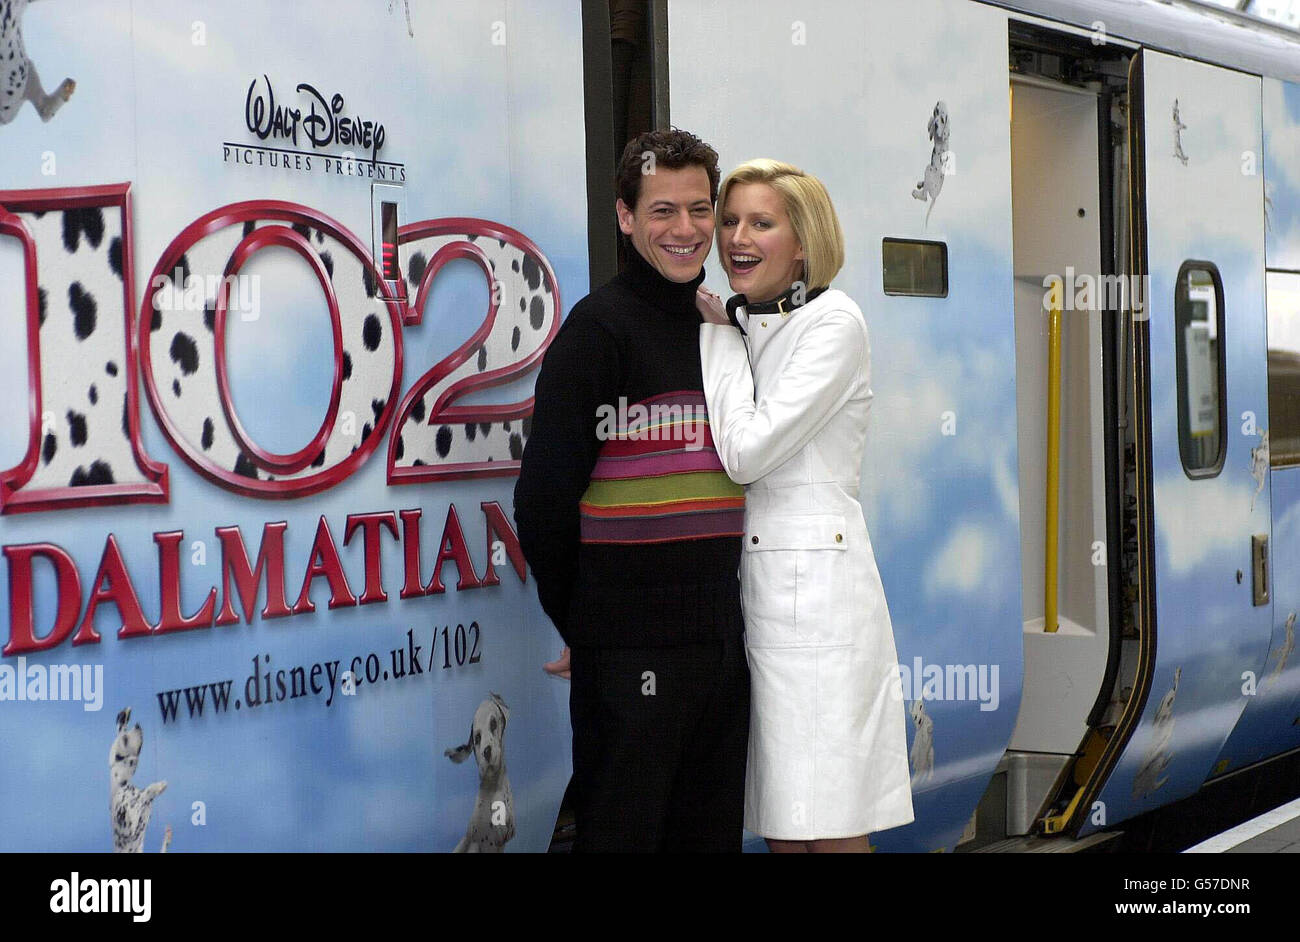 Alice Evans who plays Chloe Simon and Ioan Gruffudd who plays Kevin Sheperd in the new film 102 Dalmations at Waterloo Station in London, to launch Disney's 102 Dalmations Eurostar train. * All 18 coaches of the train are covered with images of Dalmation puppies and the train will be in service on the Brussels, Paris and Disneyland Paris routes. Stock Photo